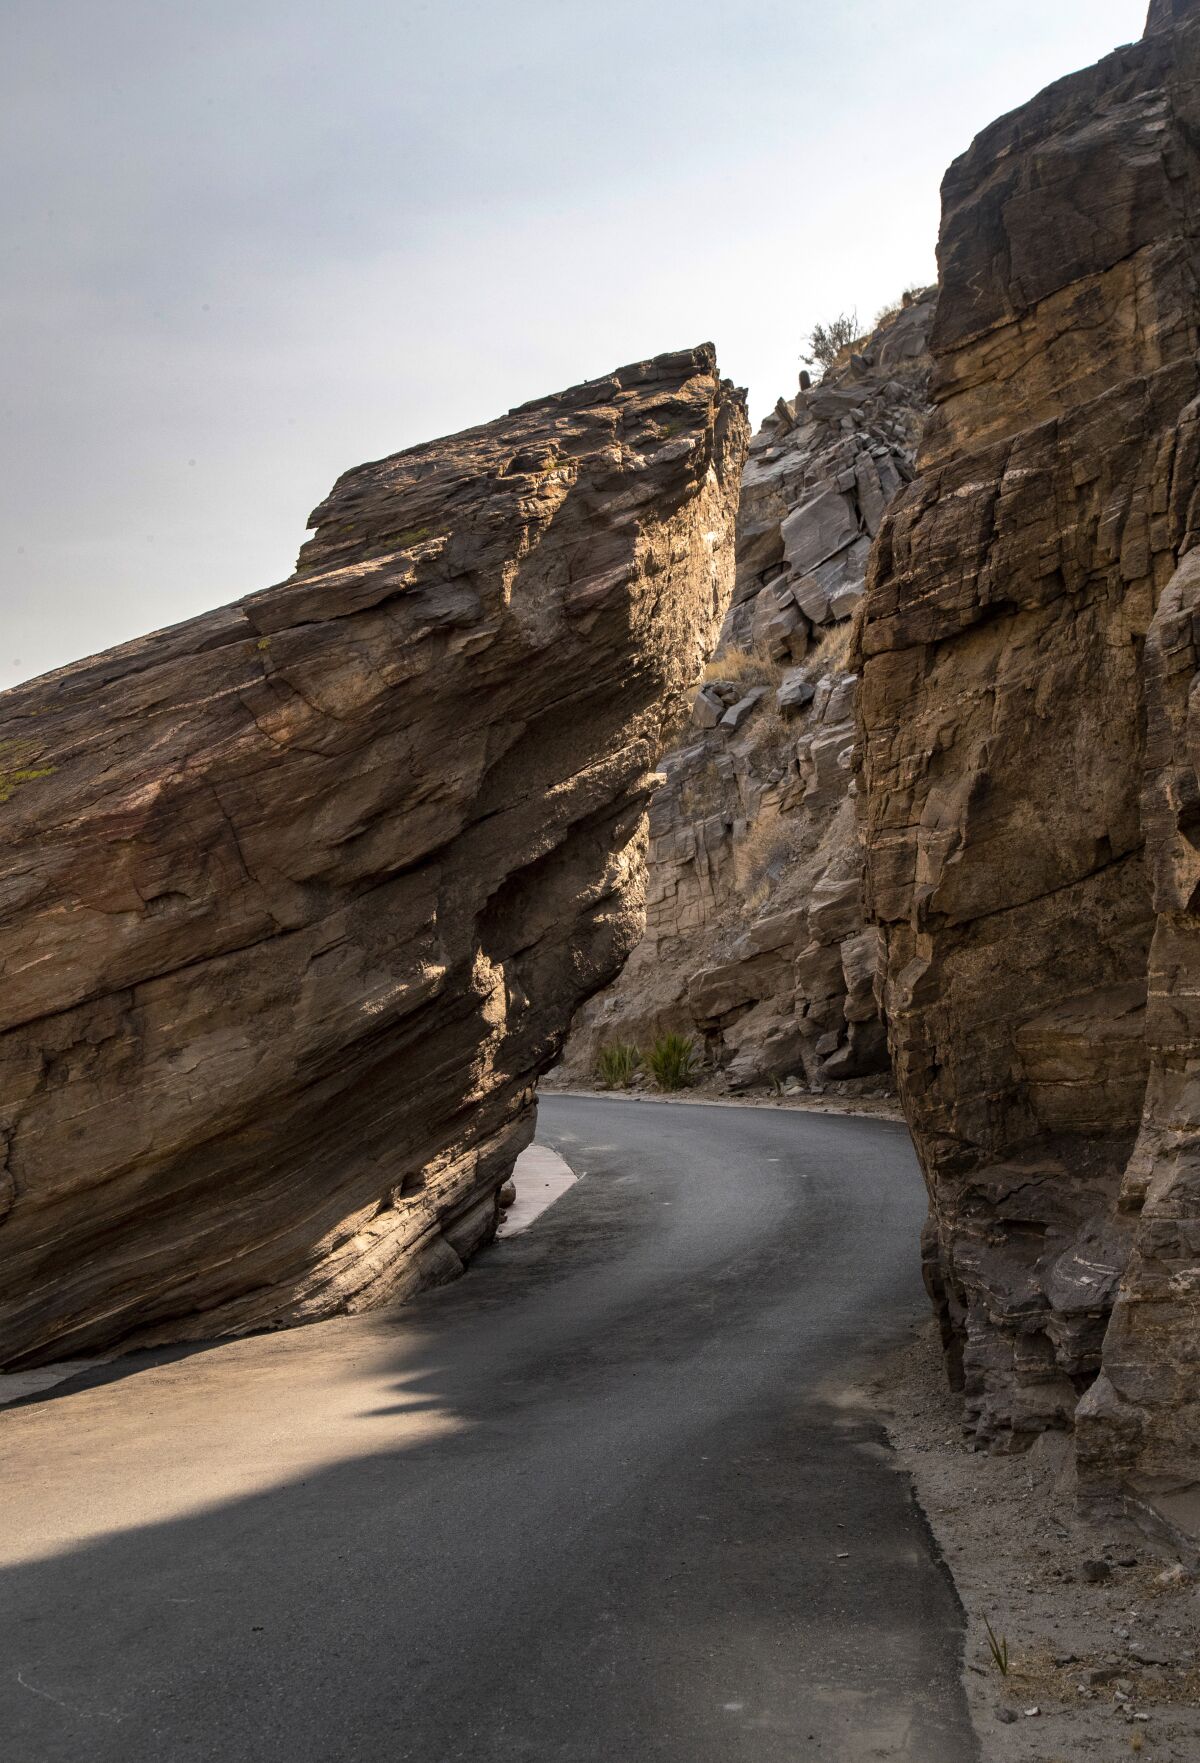 Split Rock provides a narrow opening for cars to drive through on the way to Palm Canyon inside the Indian Canyons.